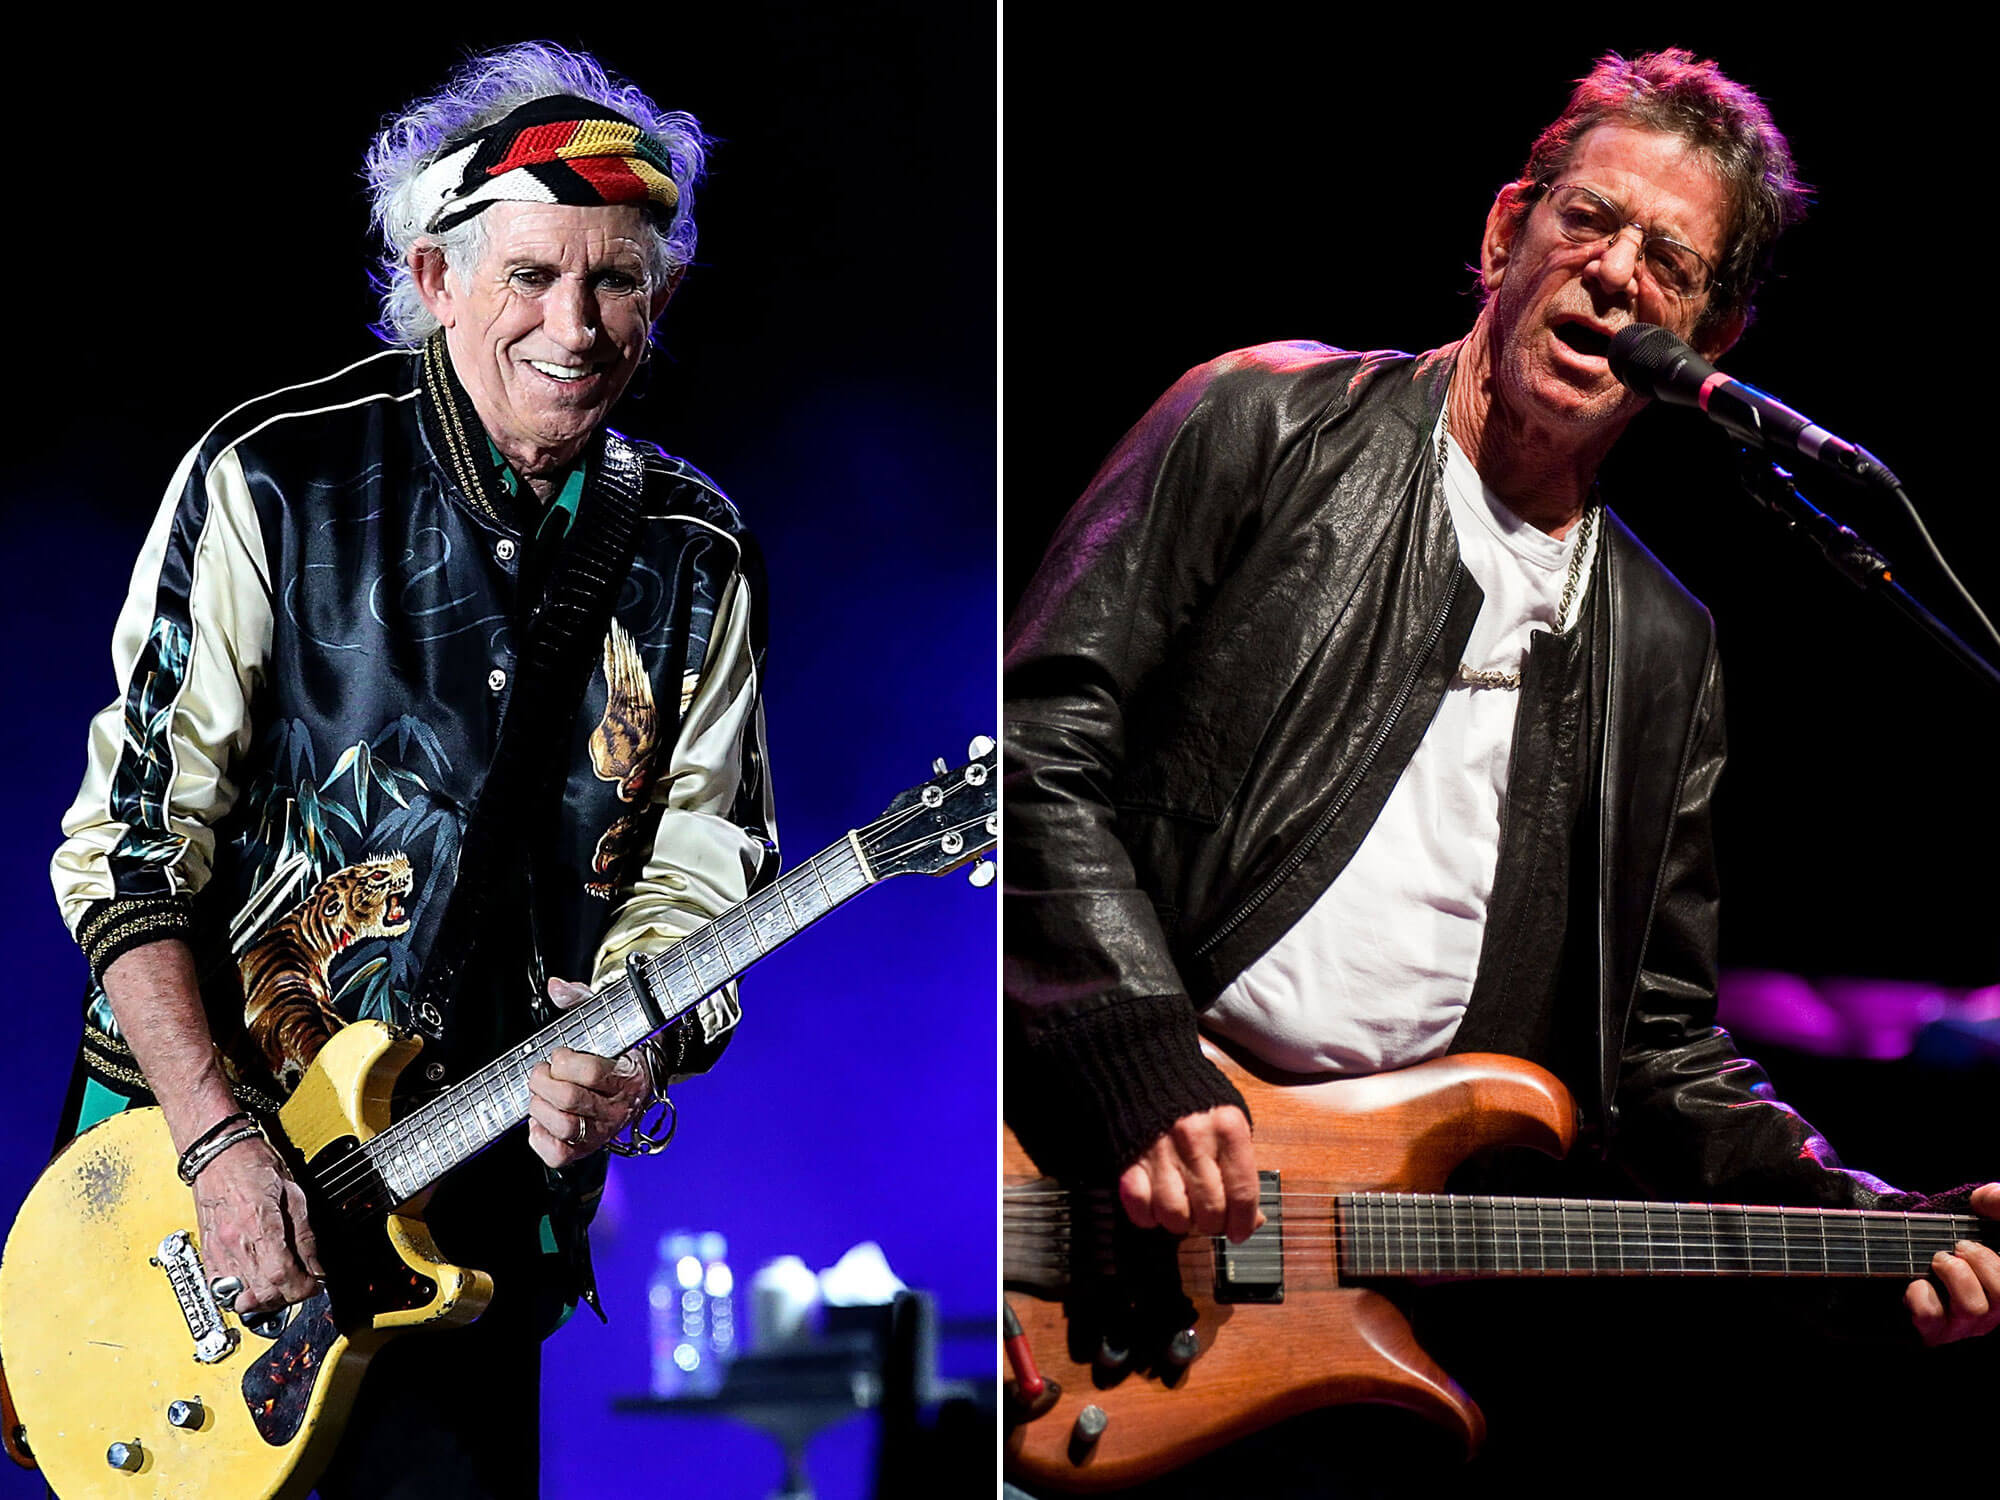 [L-R] Keith Richards and Lou Reed